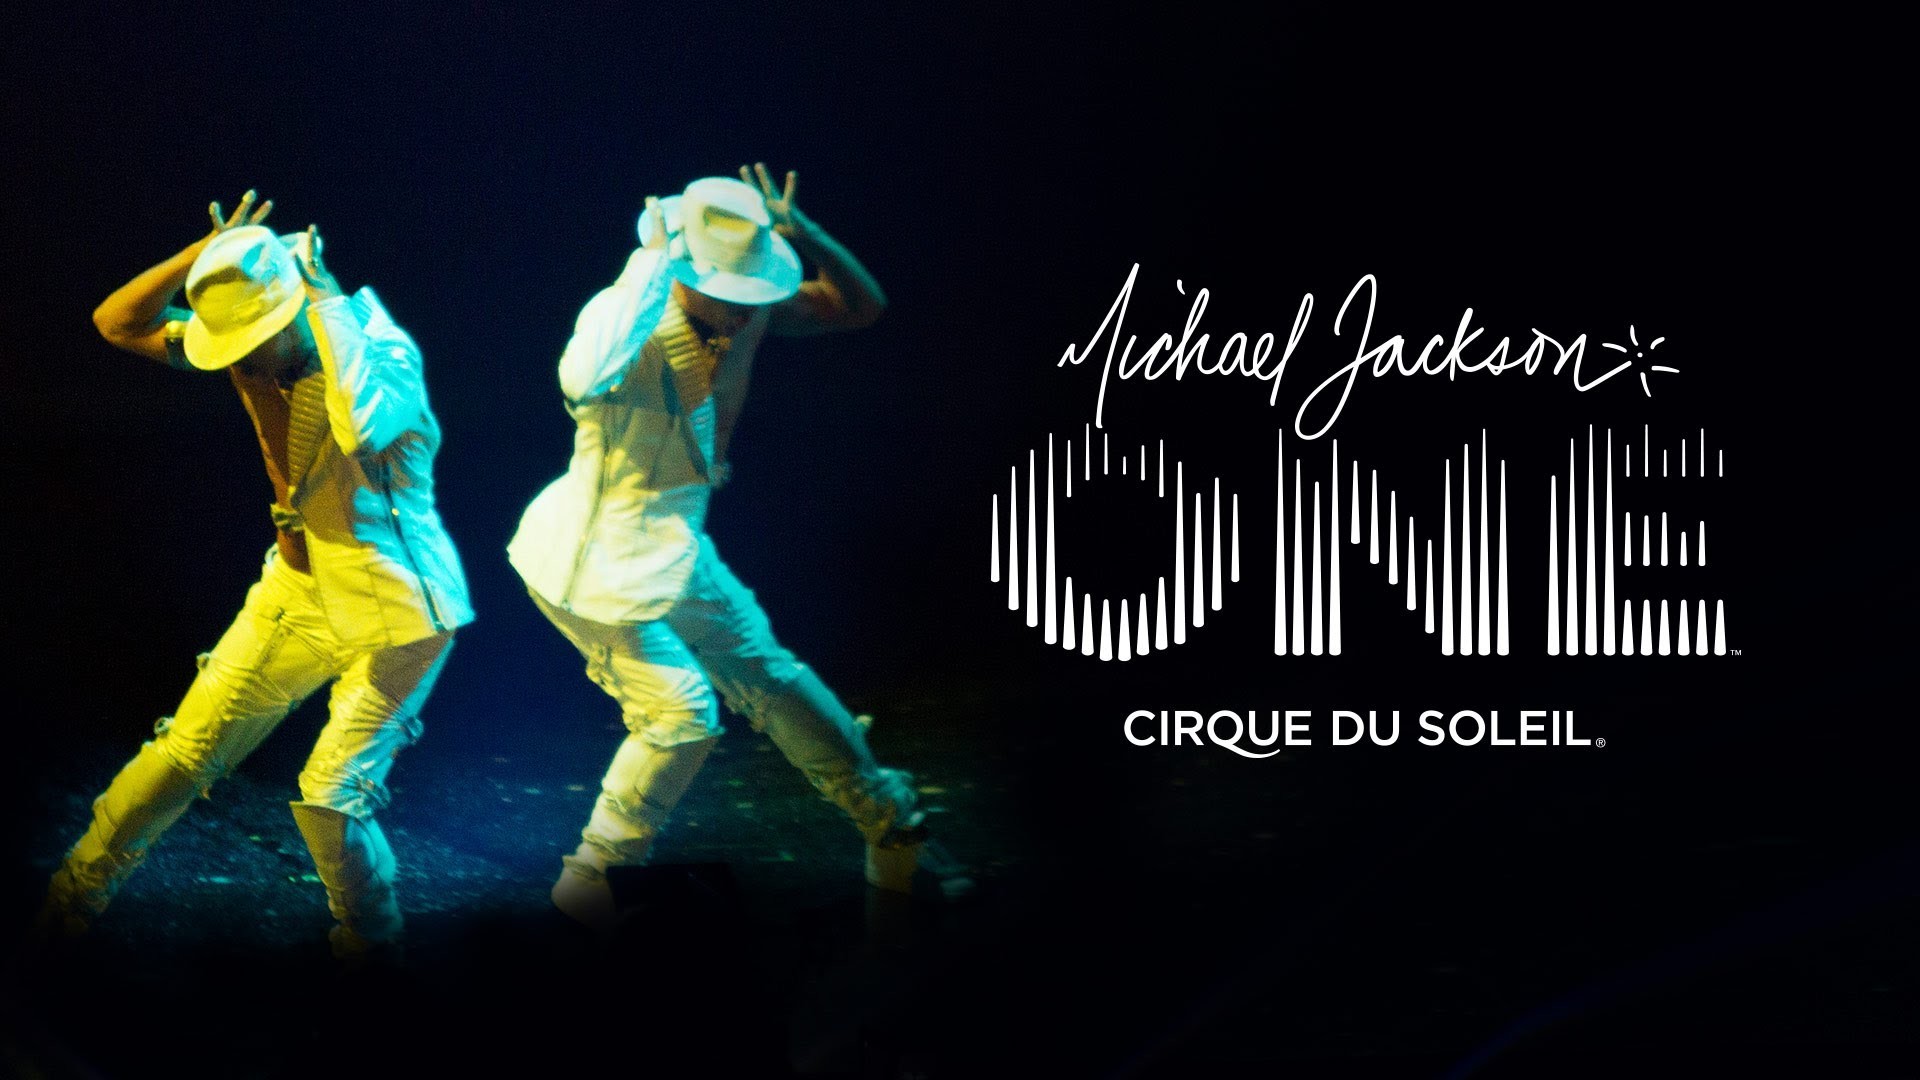 1920x1080 Michael Jackson ONE by Cirque du Soleil Can we pleeeaase go see this in  Vegas?